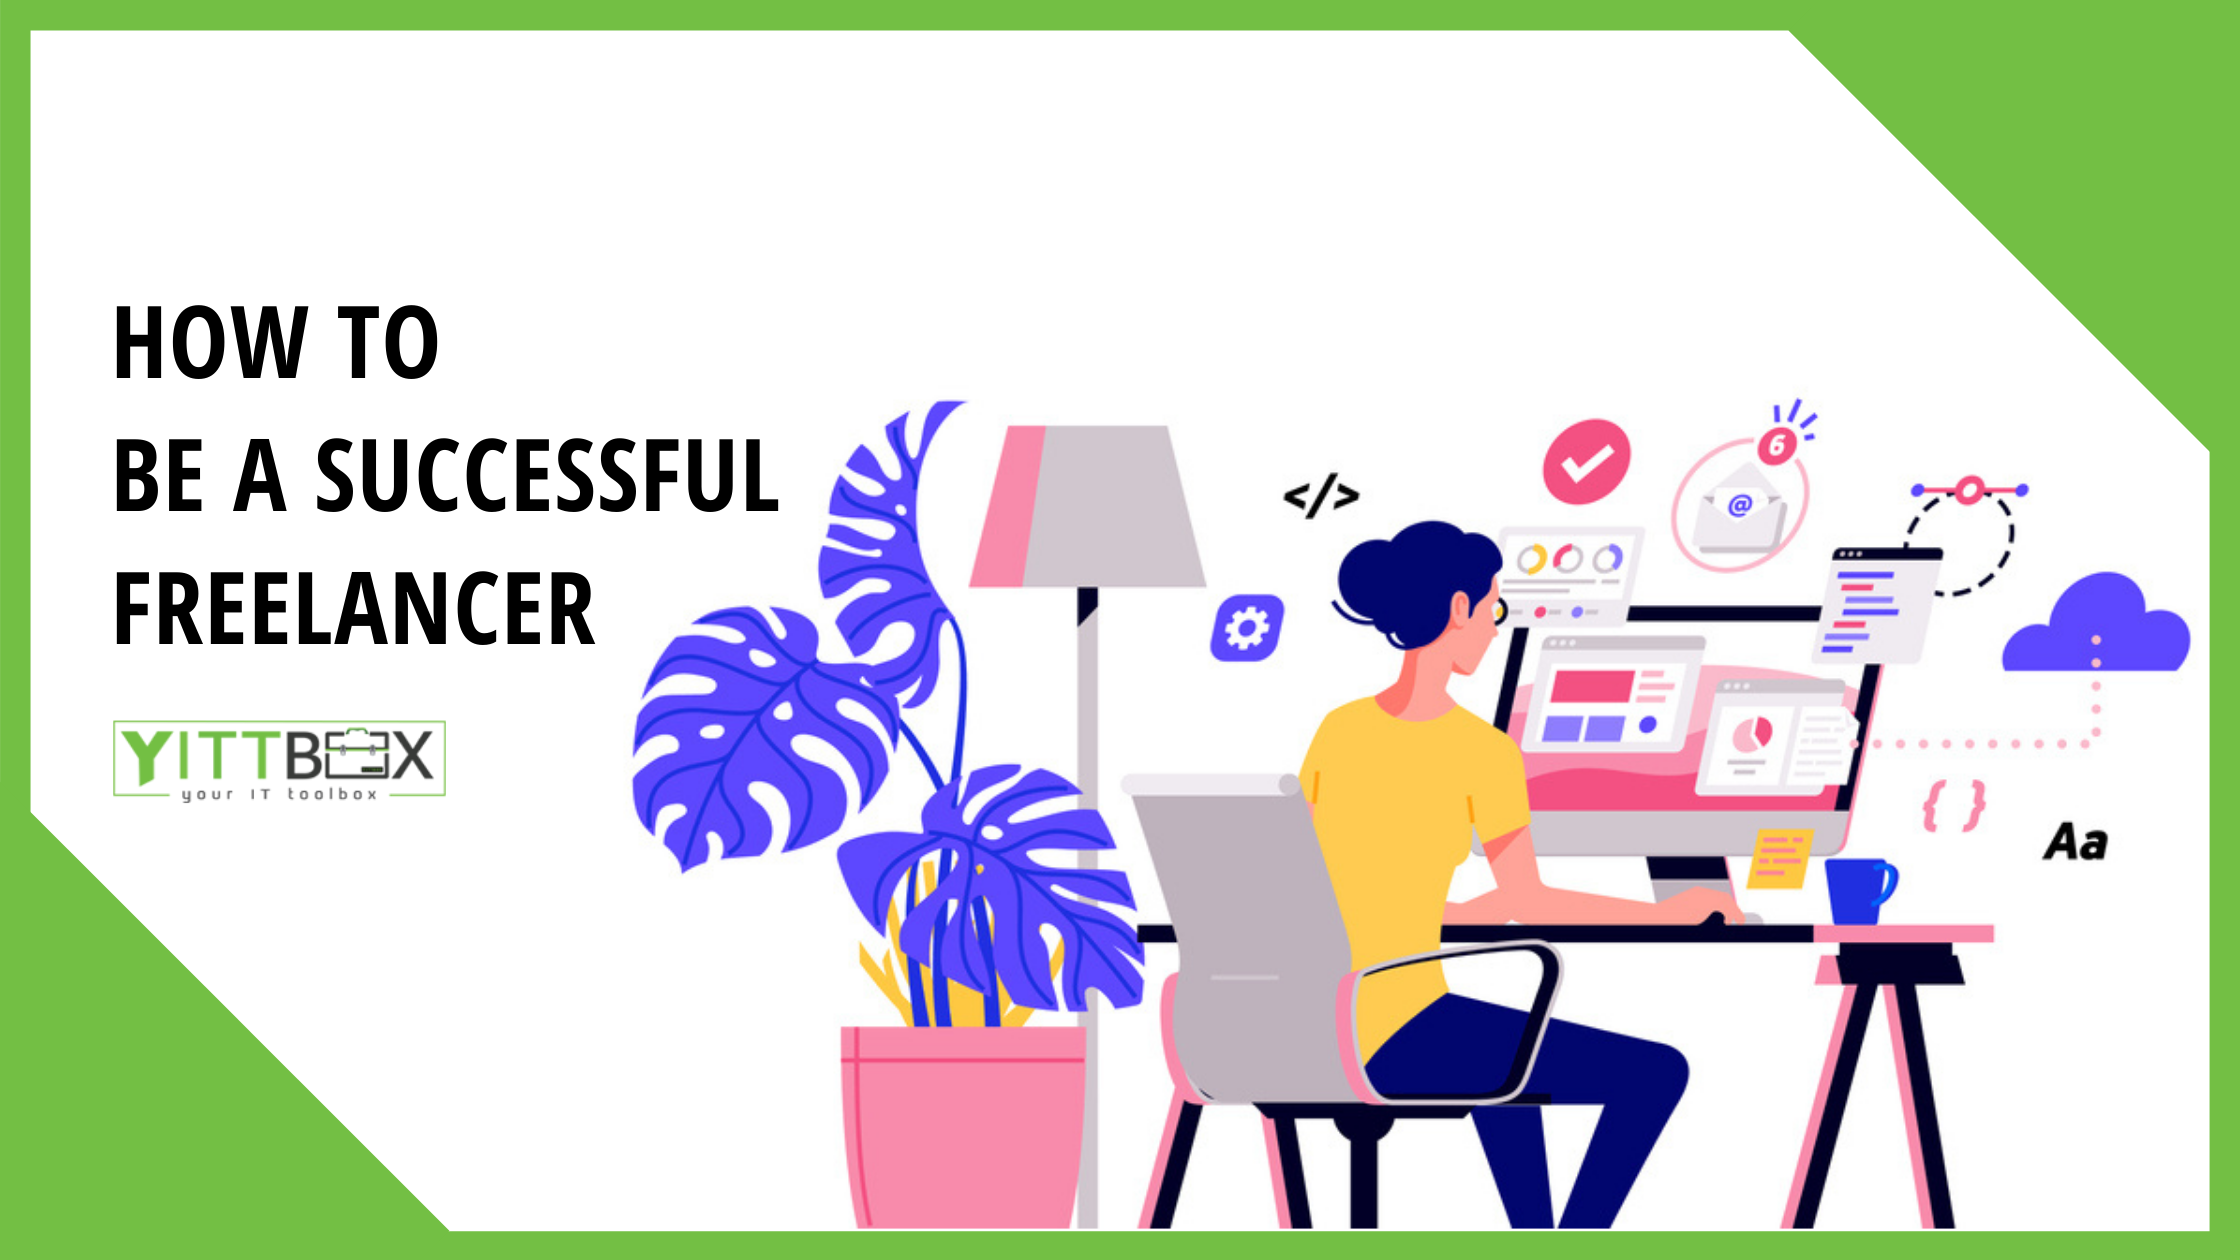 How to be a Successful Freelancer